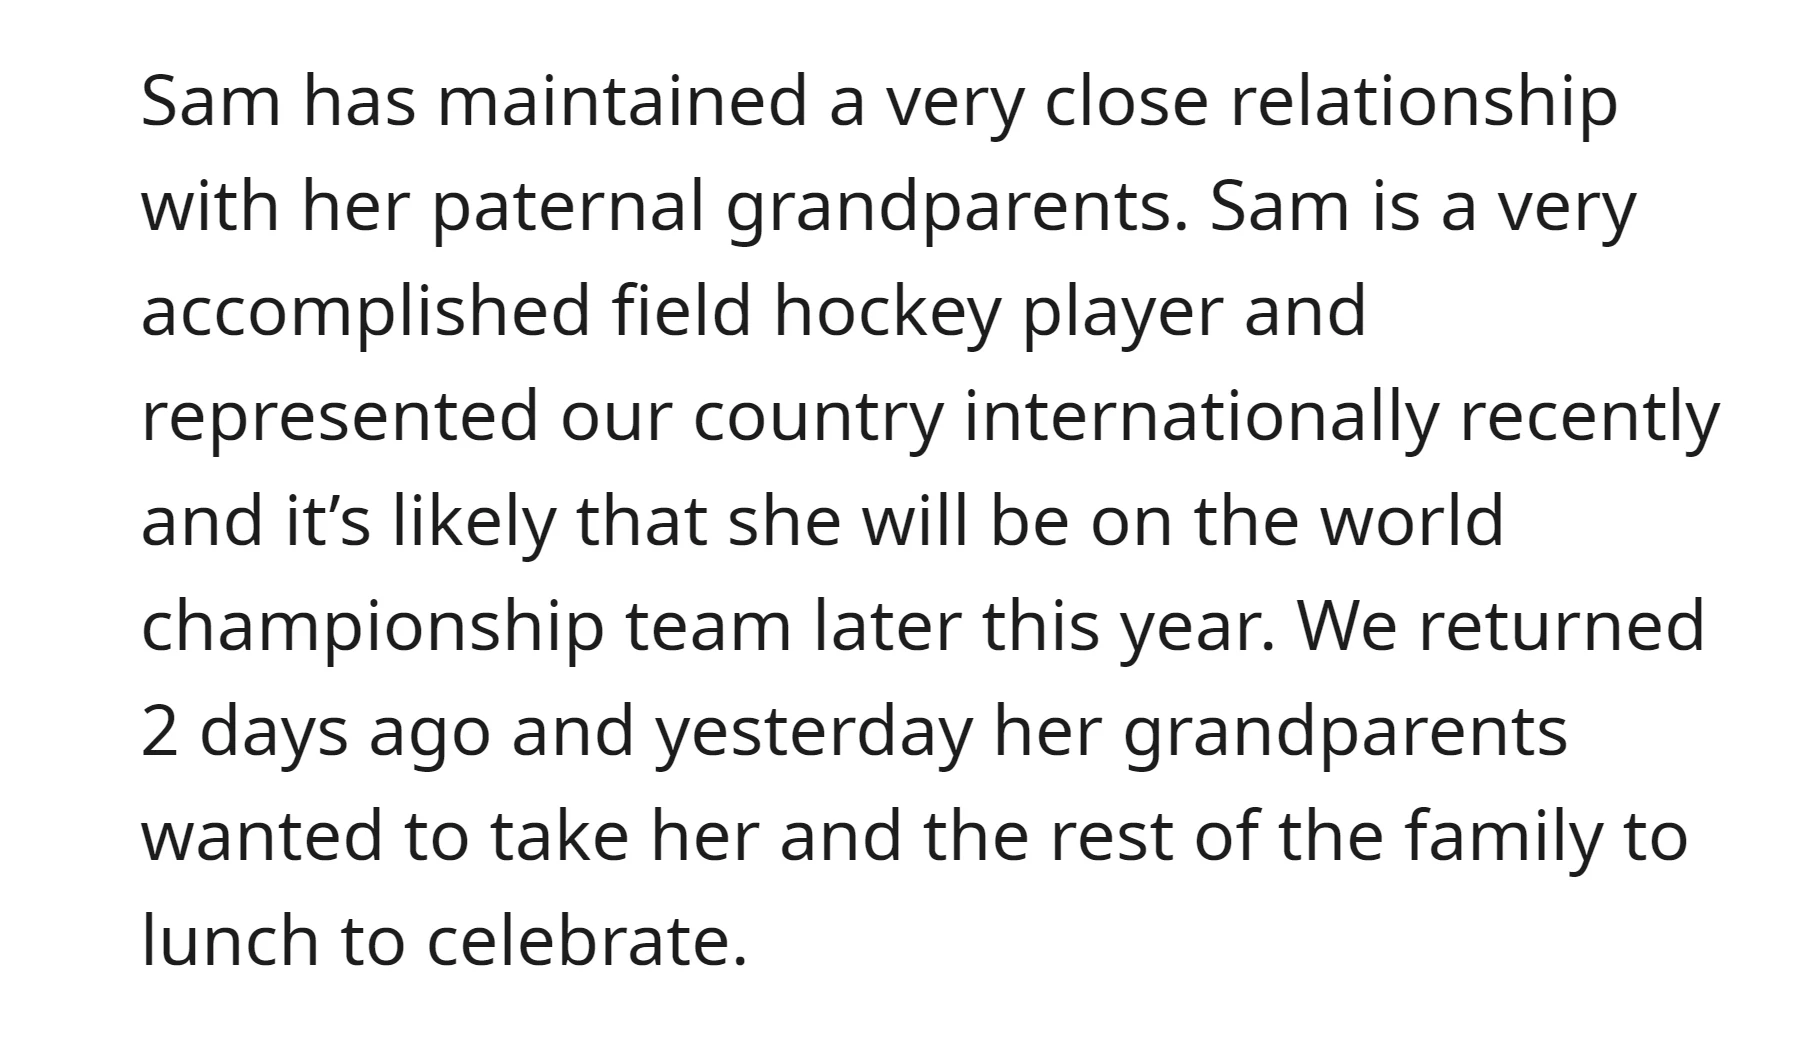 Sam's grandparents wanted to celebrate her recent international field hockey achievement with a family lunch